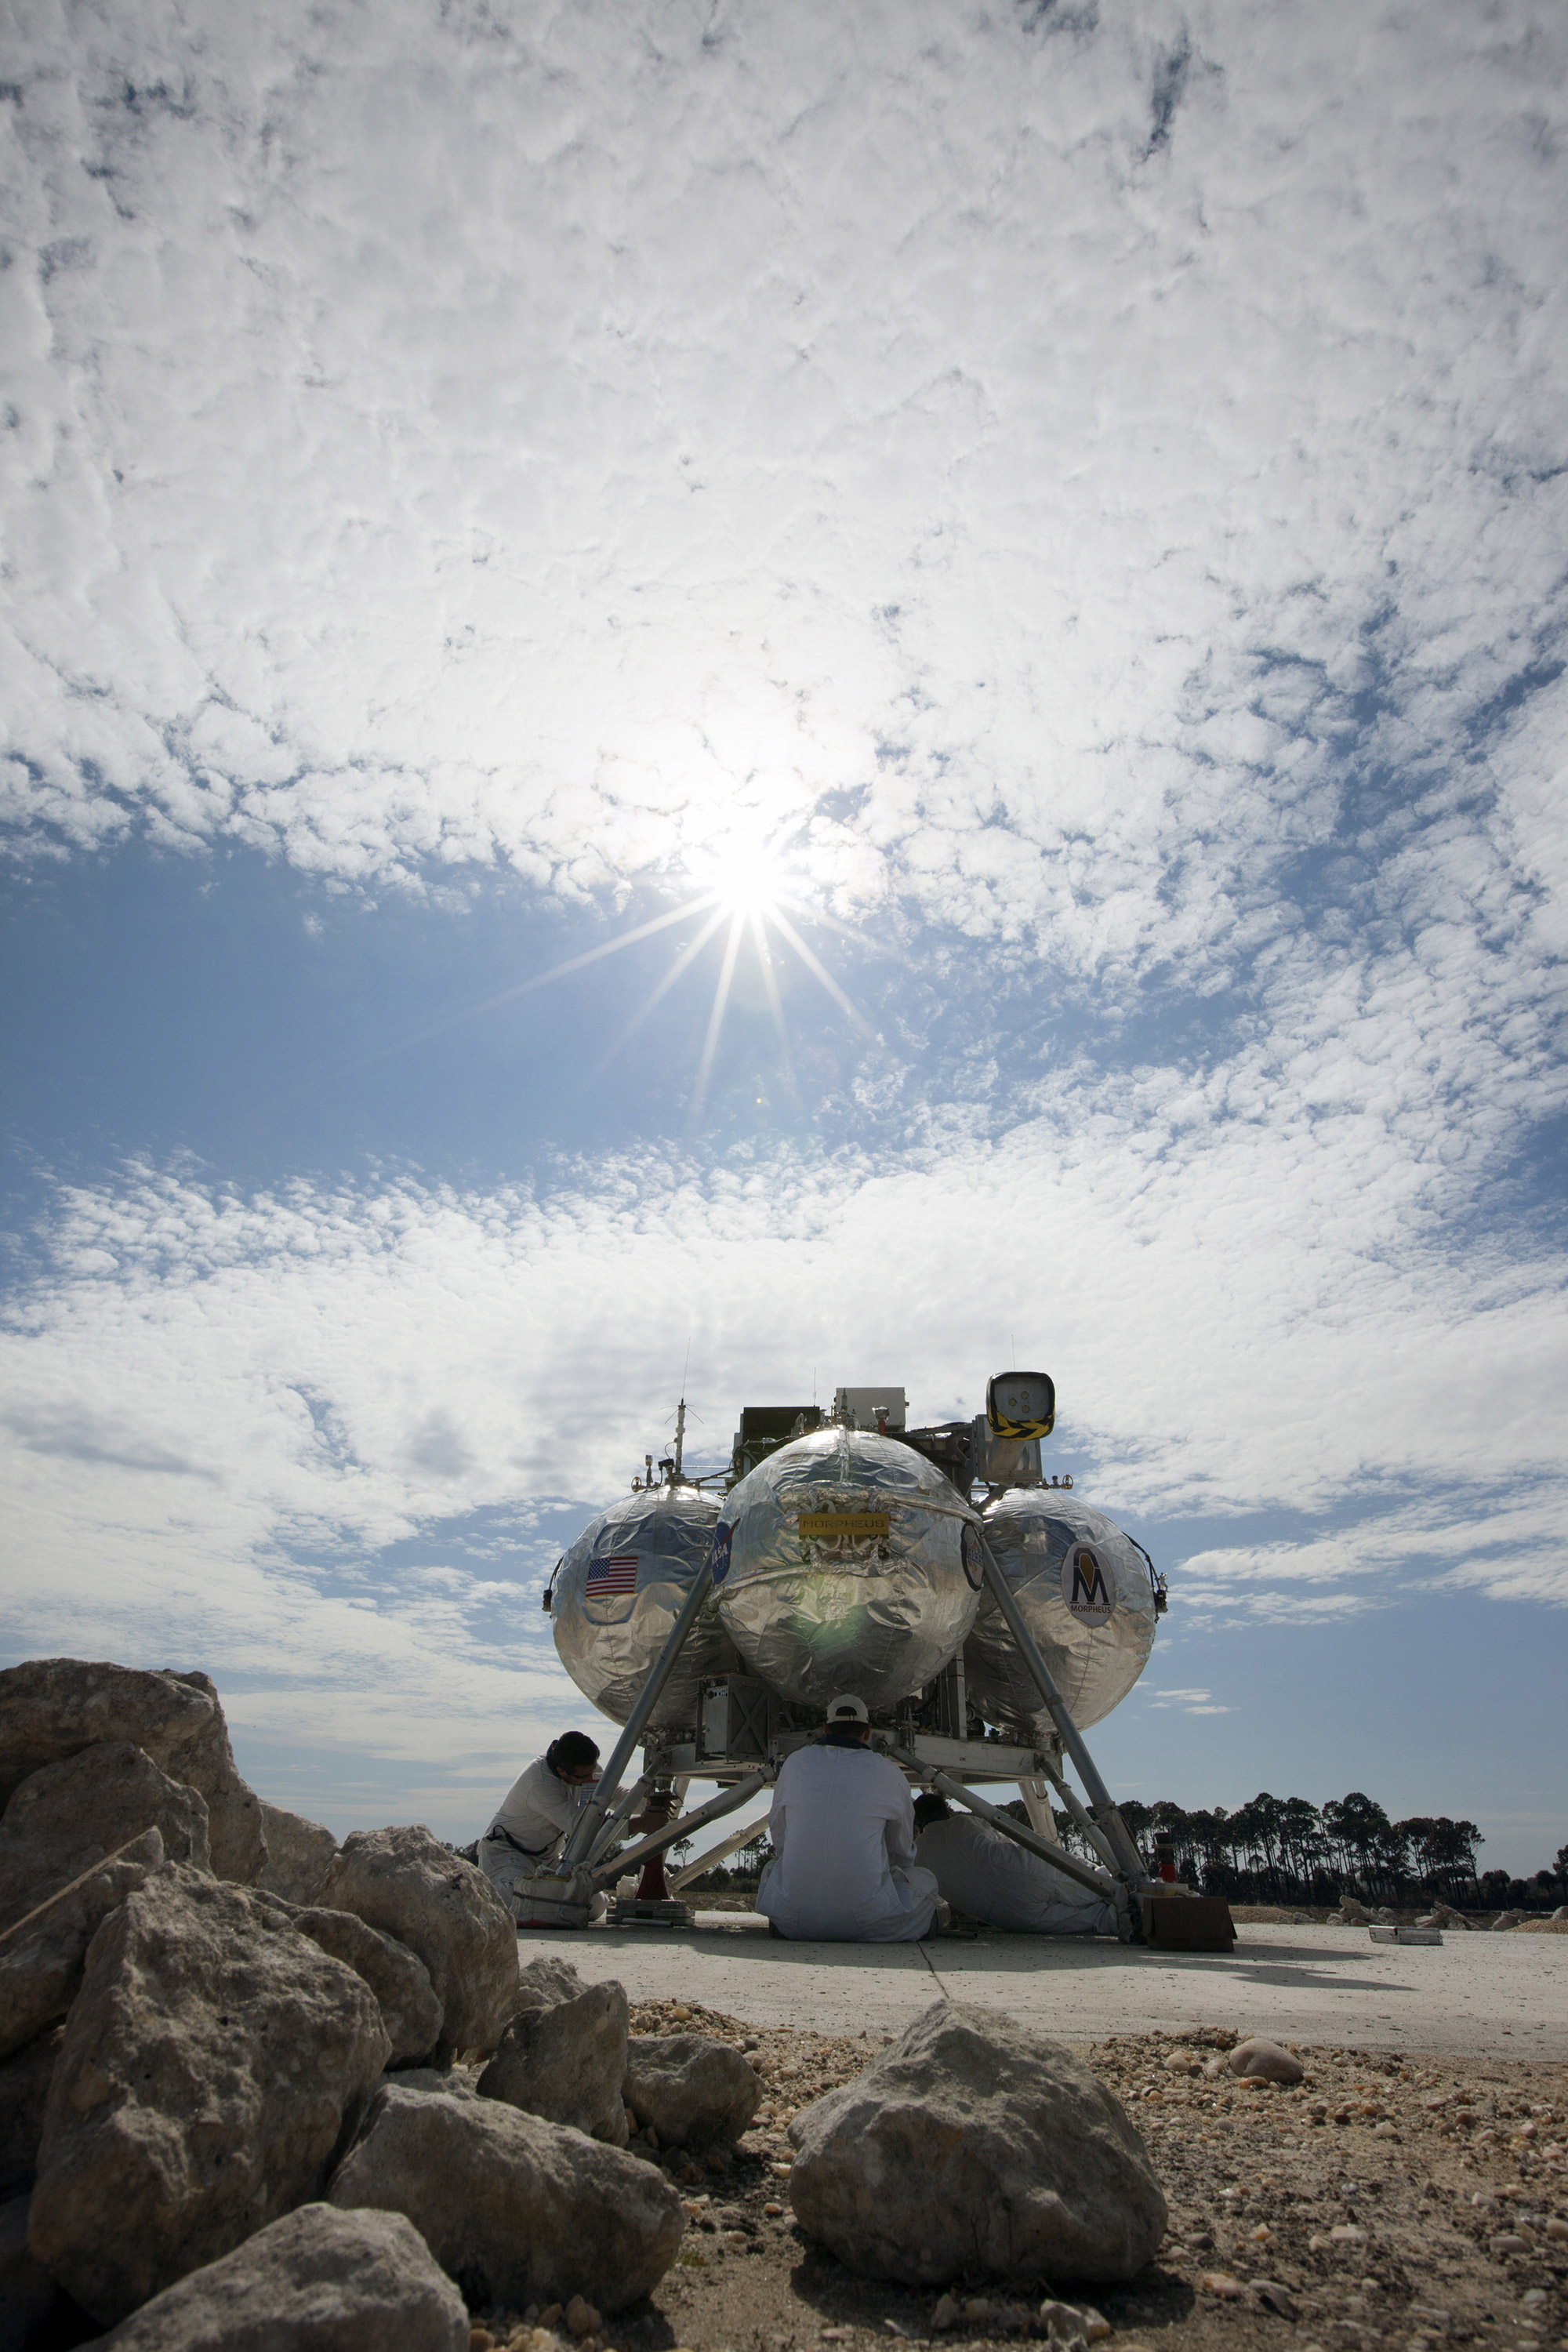 The Project Morpheus prototype lander during test at Kennedy Space Center in Florida. Credit: NASA/Kim Shiflett